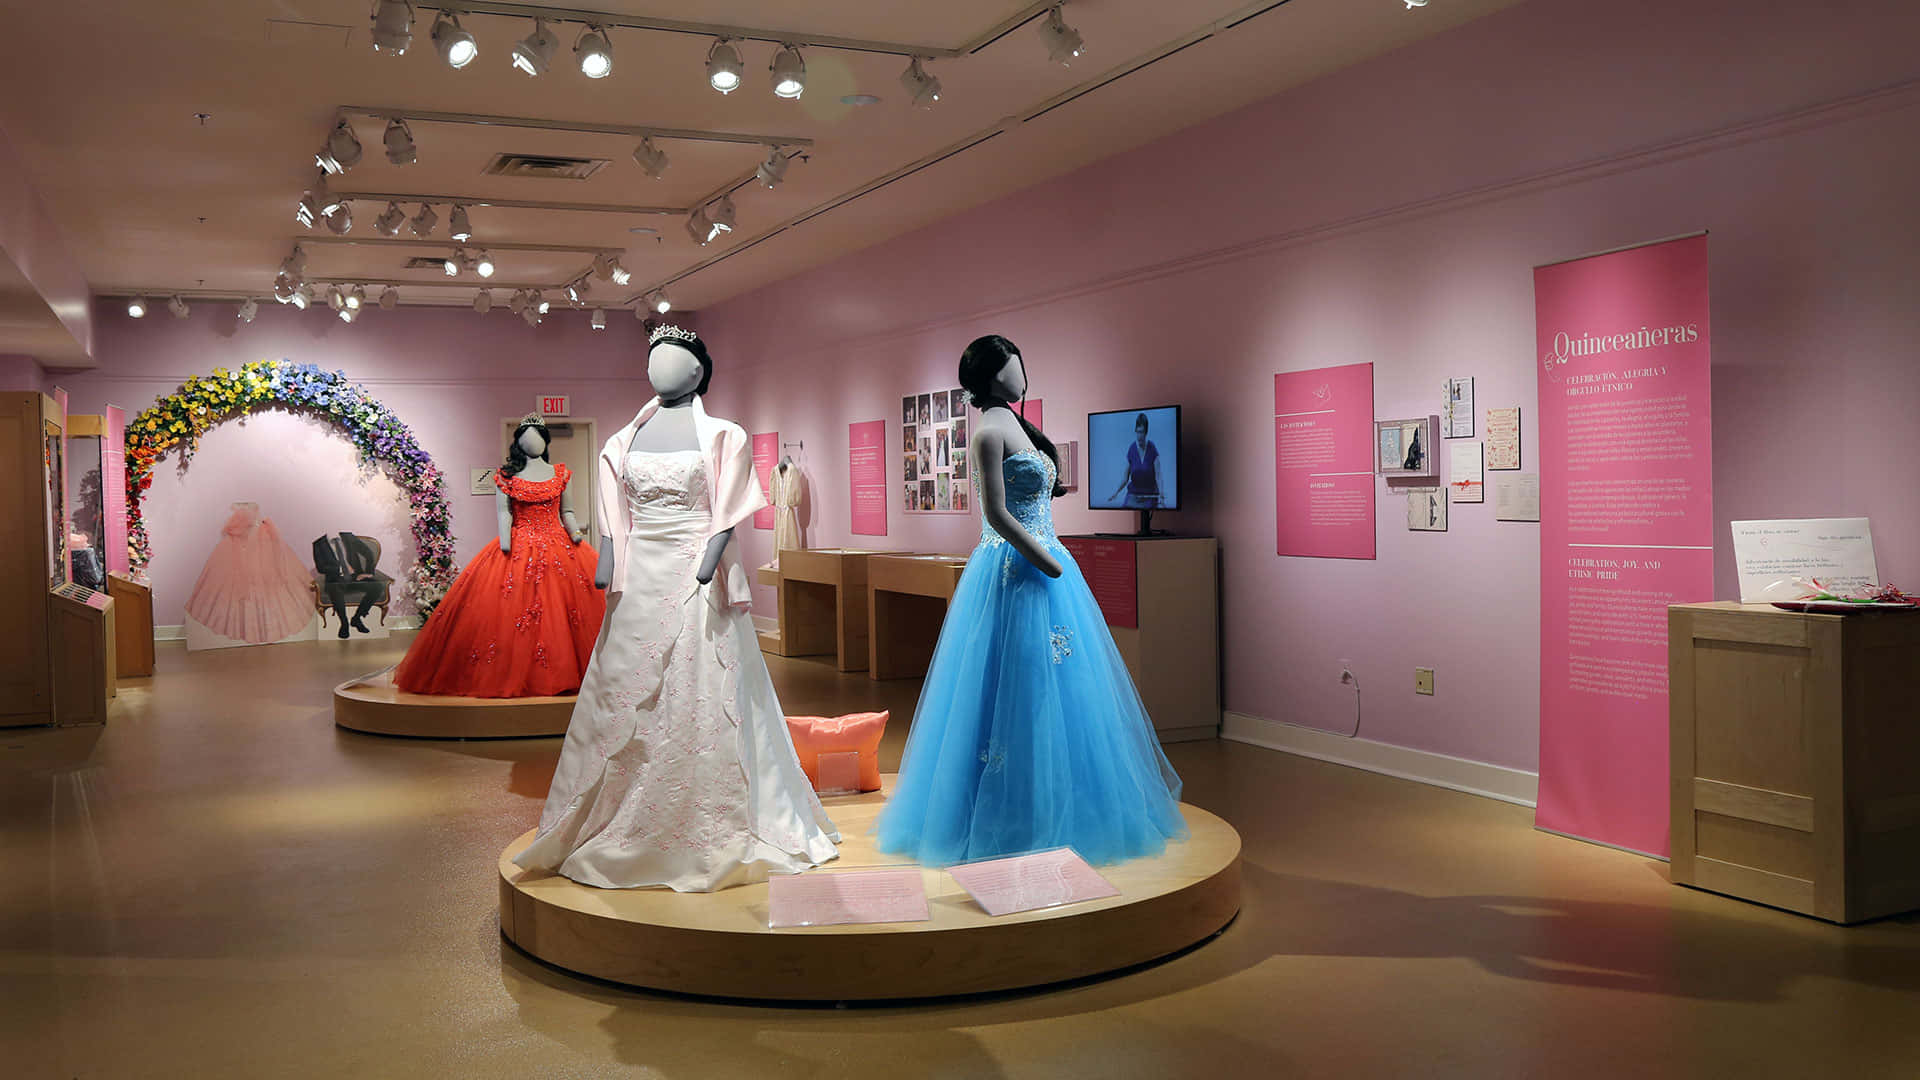 A Display Of Dresses On Display In A Museum